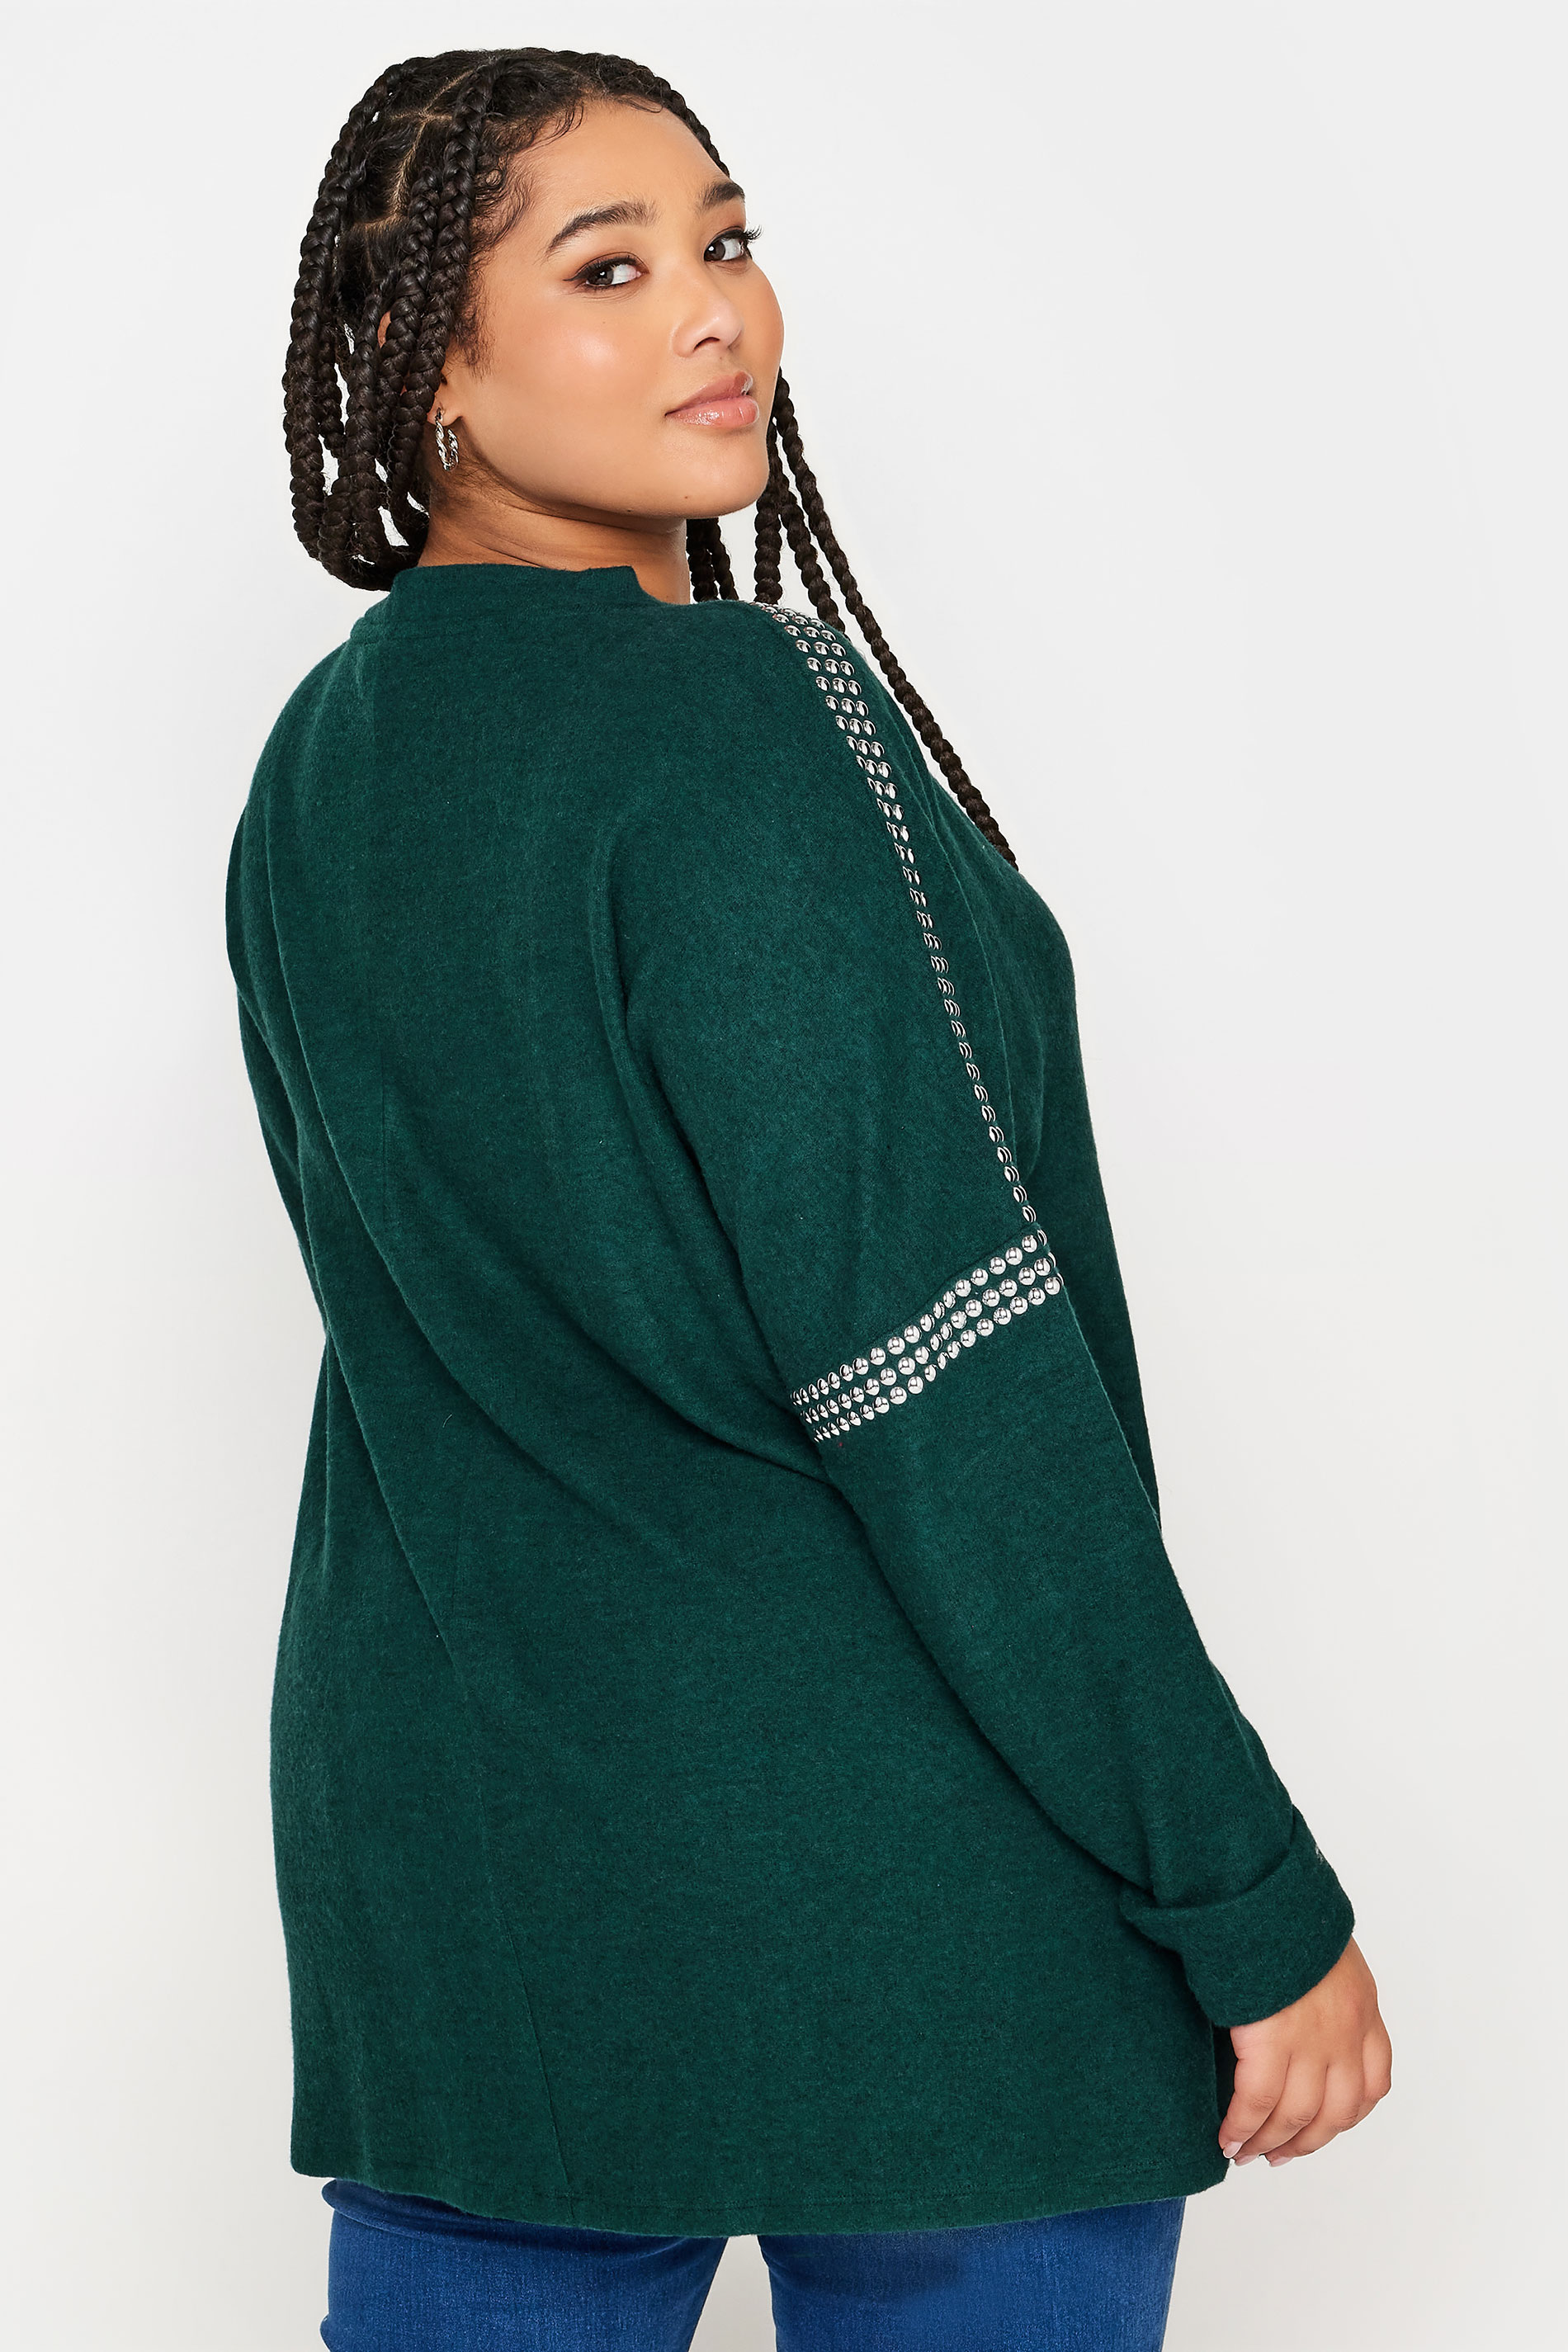 YOURS Plus Size Teal Blue Stud Batwing Sleeve Jumper | Yours Clothing 3